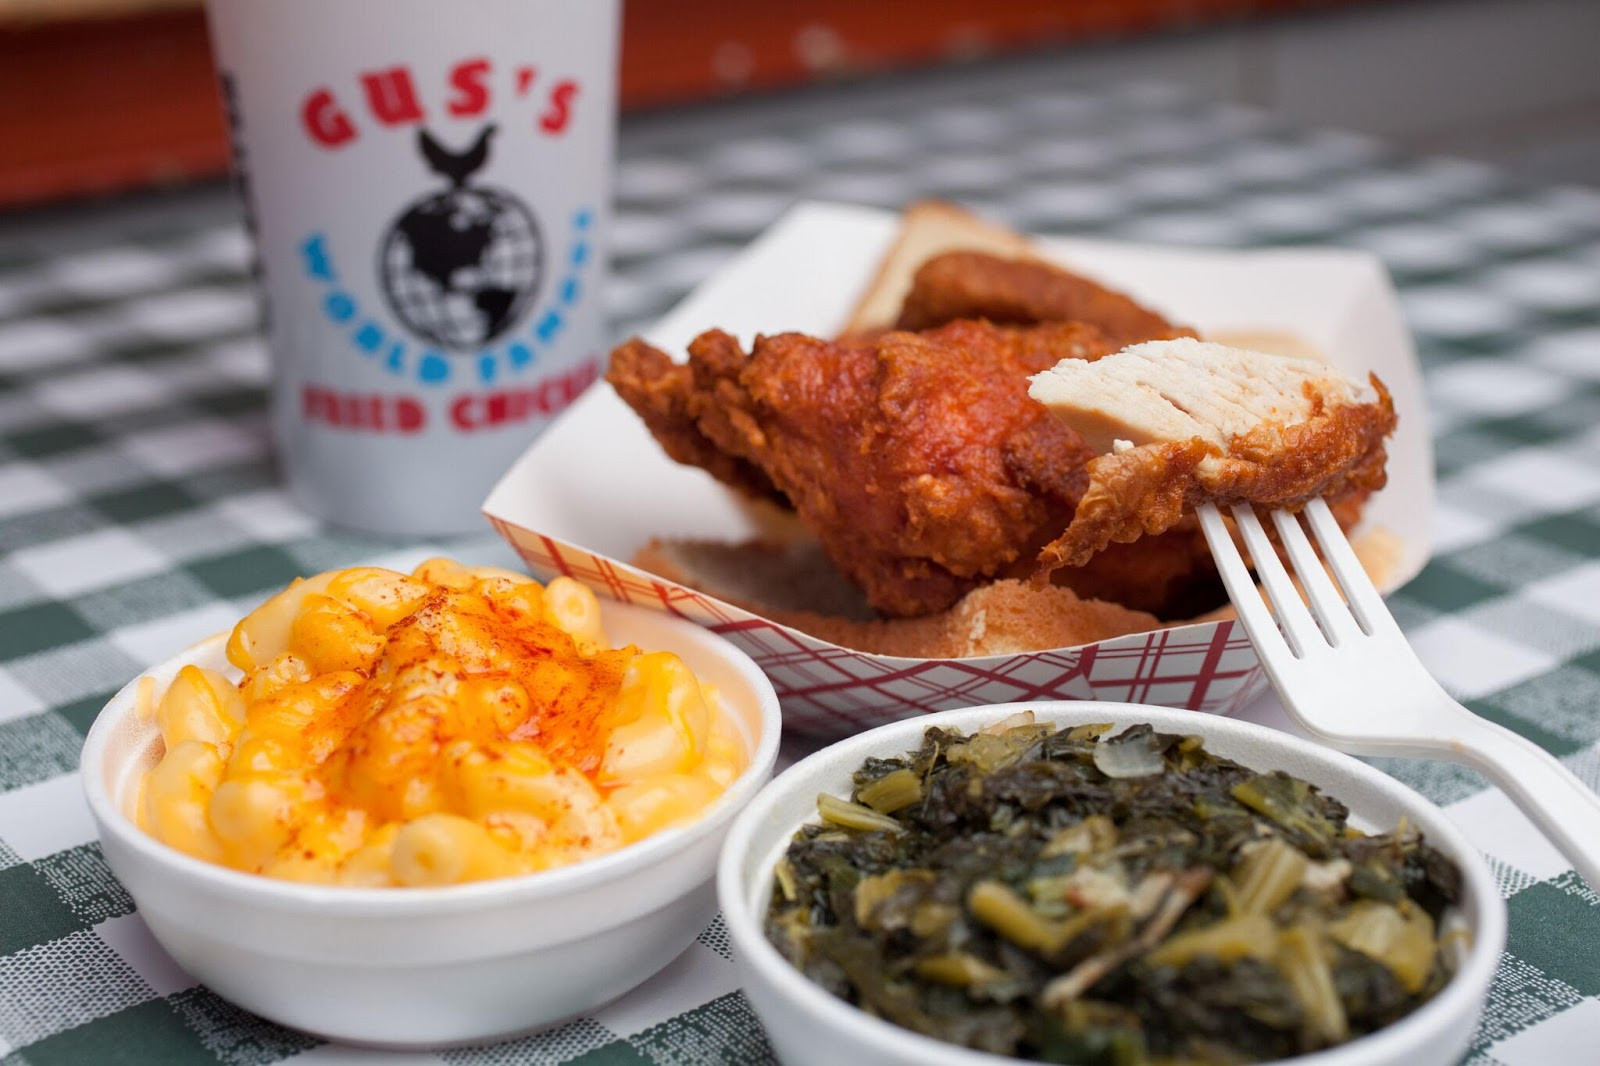 Gus Fried Chicken
 Restaurant review and GIVEAWAY Gus s World Famous Fried